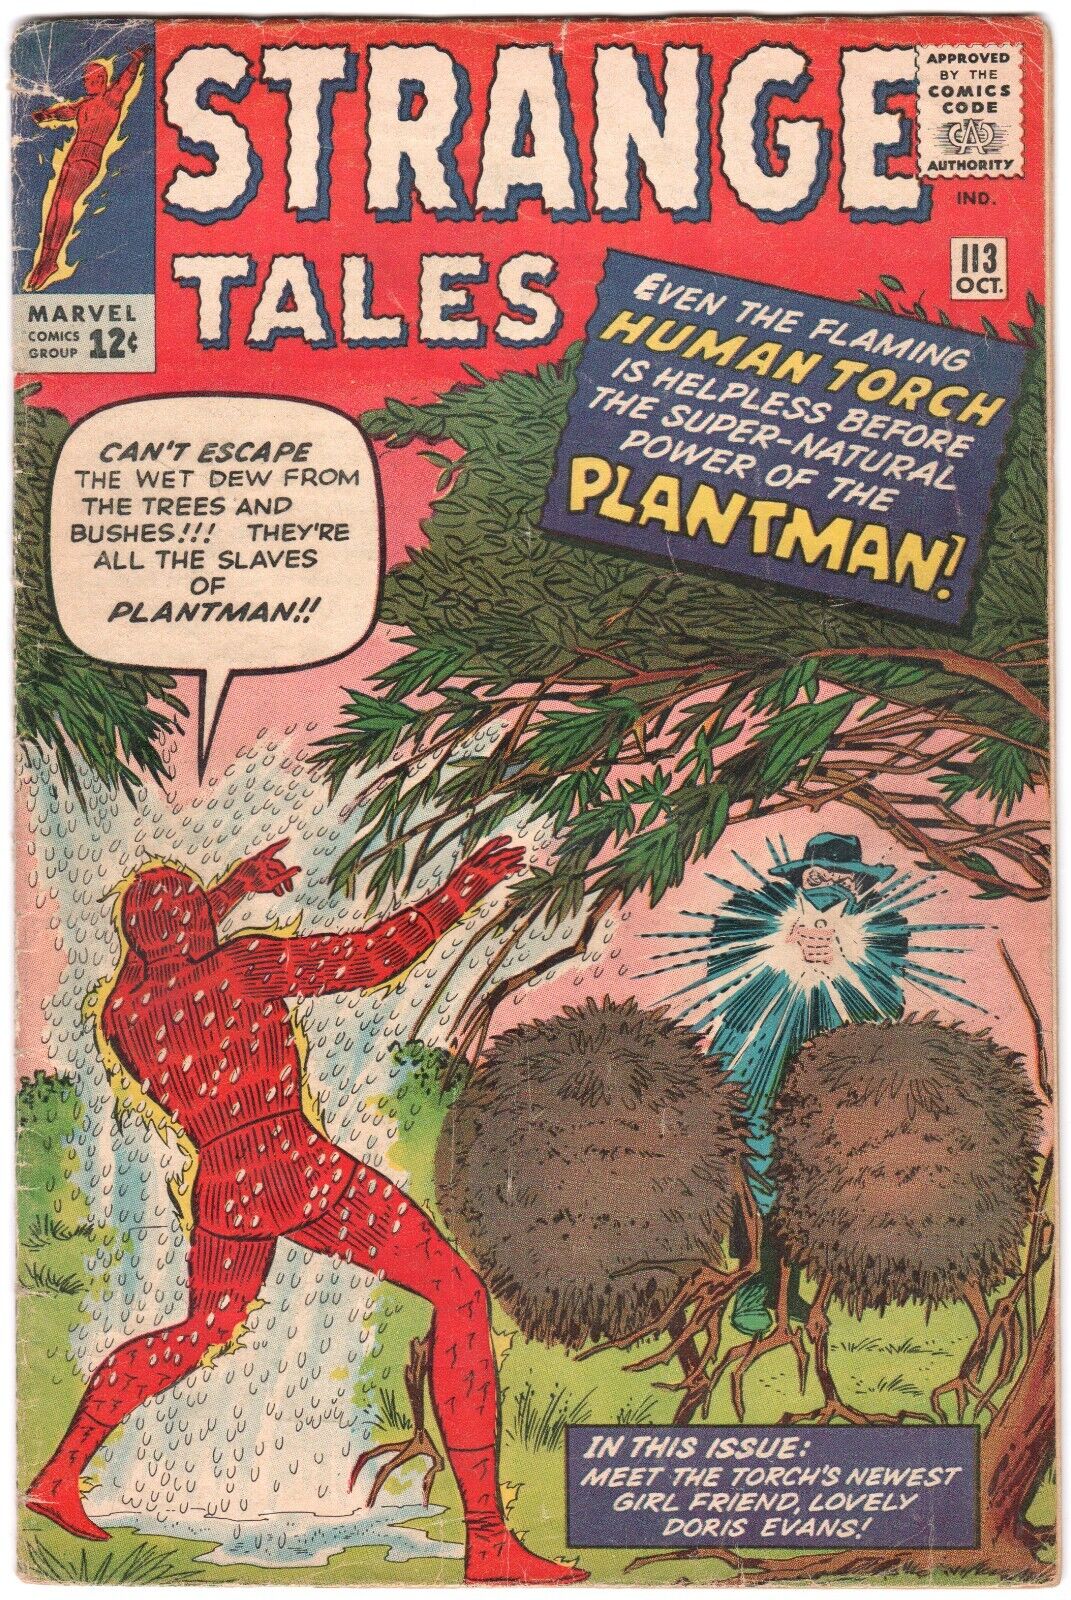 STRANGE TALES #113 solo HUMAN TORCH Origin and 1st Appearance The PLANTMAN VG